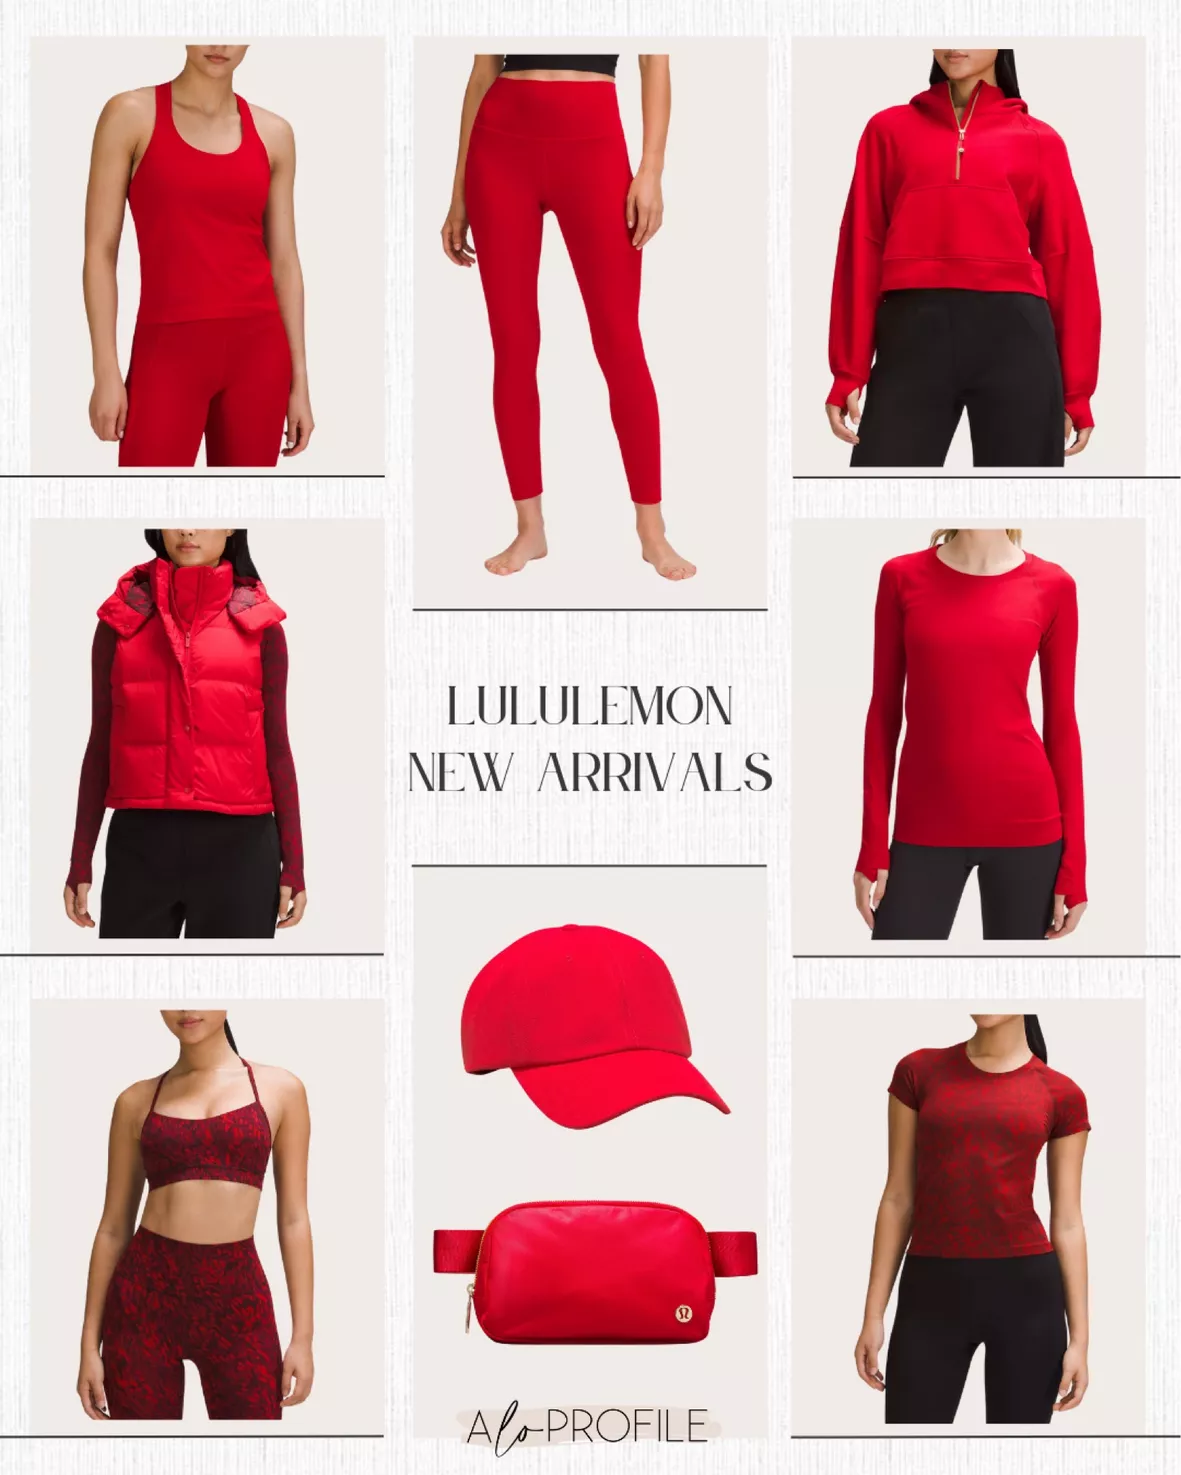 Activewear Outfits, Workout Clothes curated on LTK